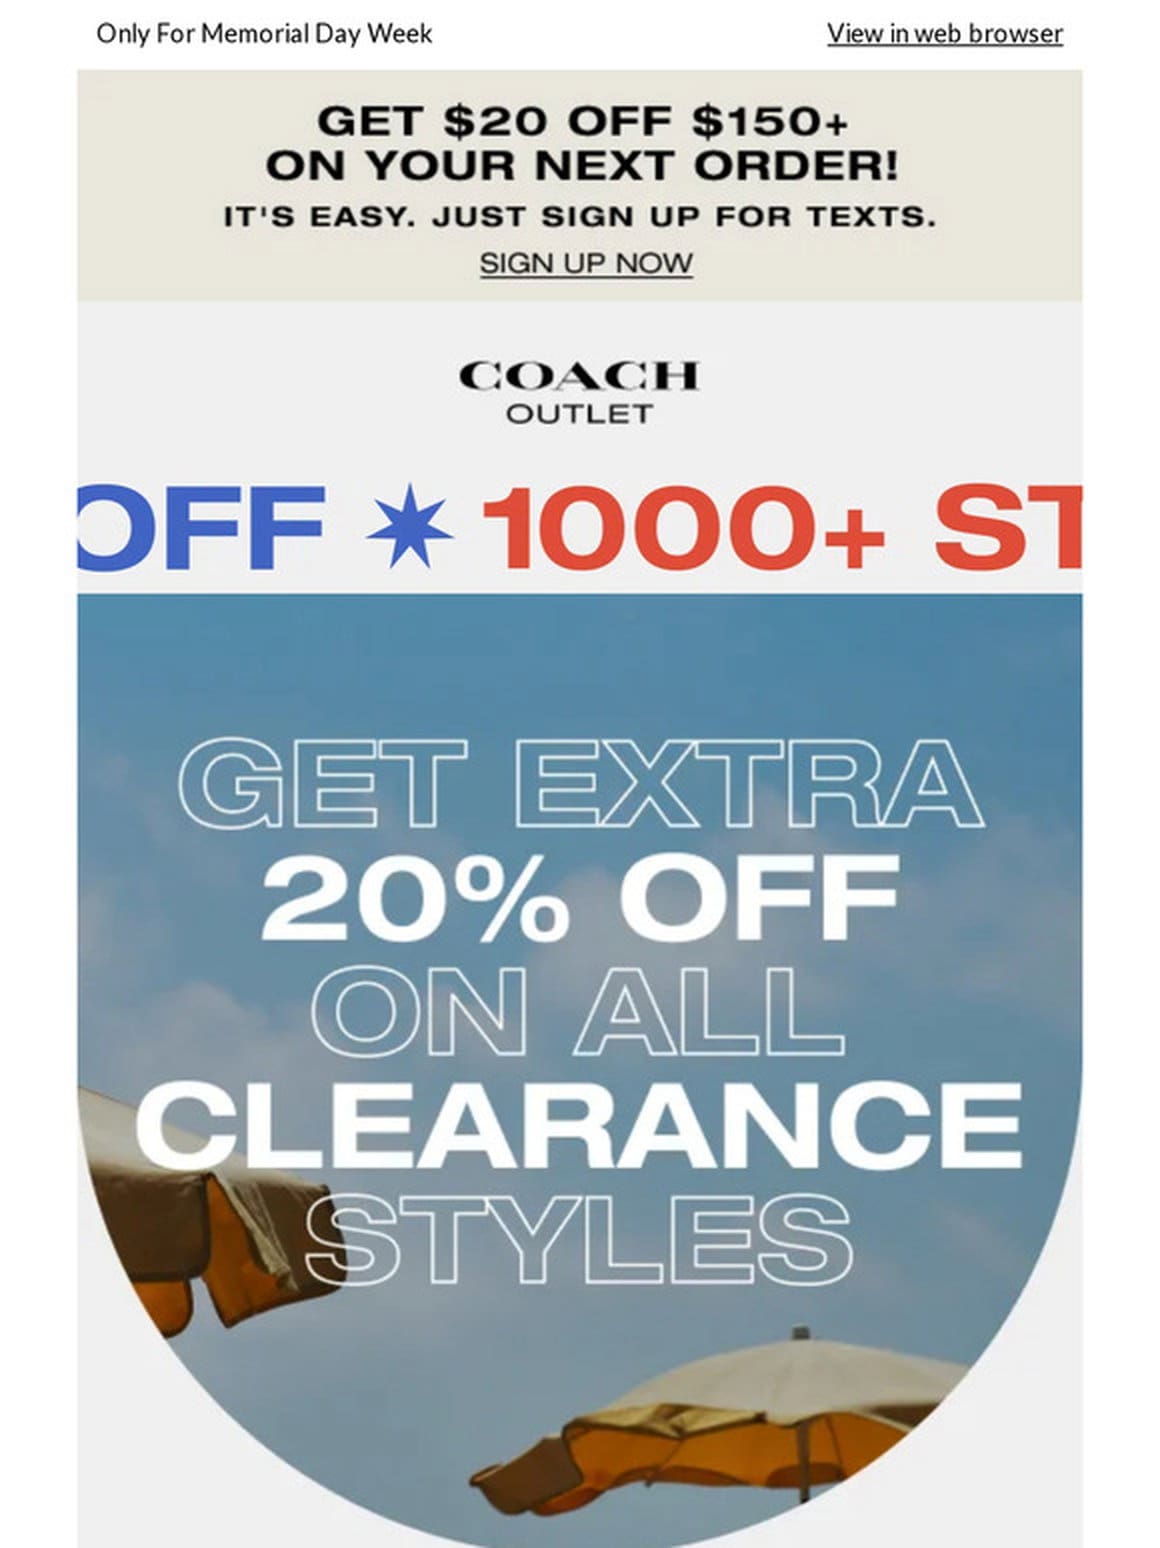 ???? You’ve Landed An Additional 20% Off All Clearance